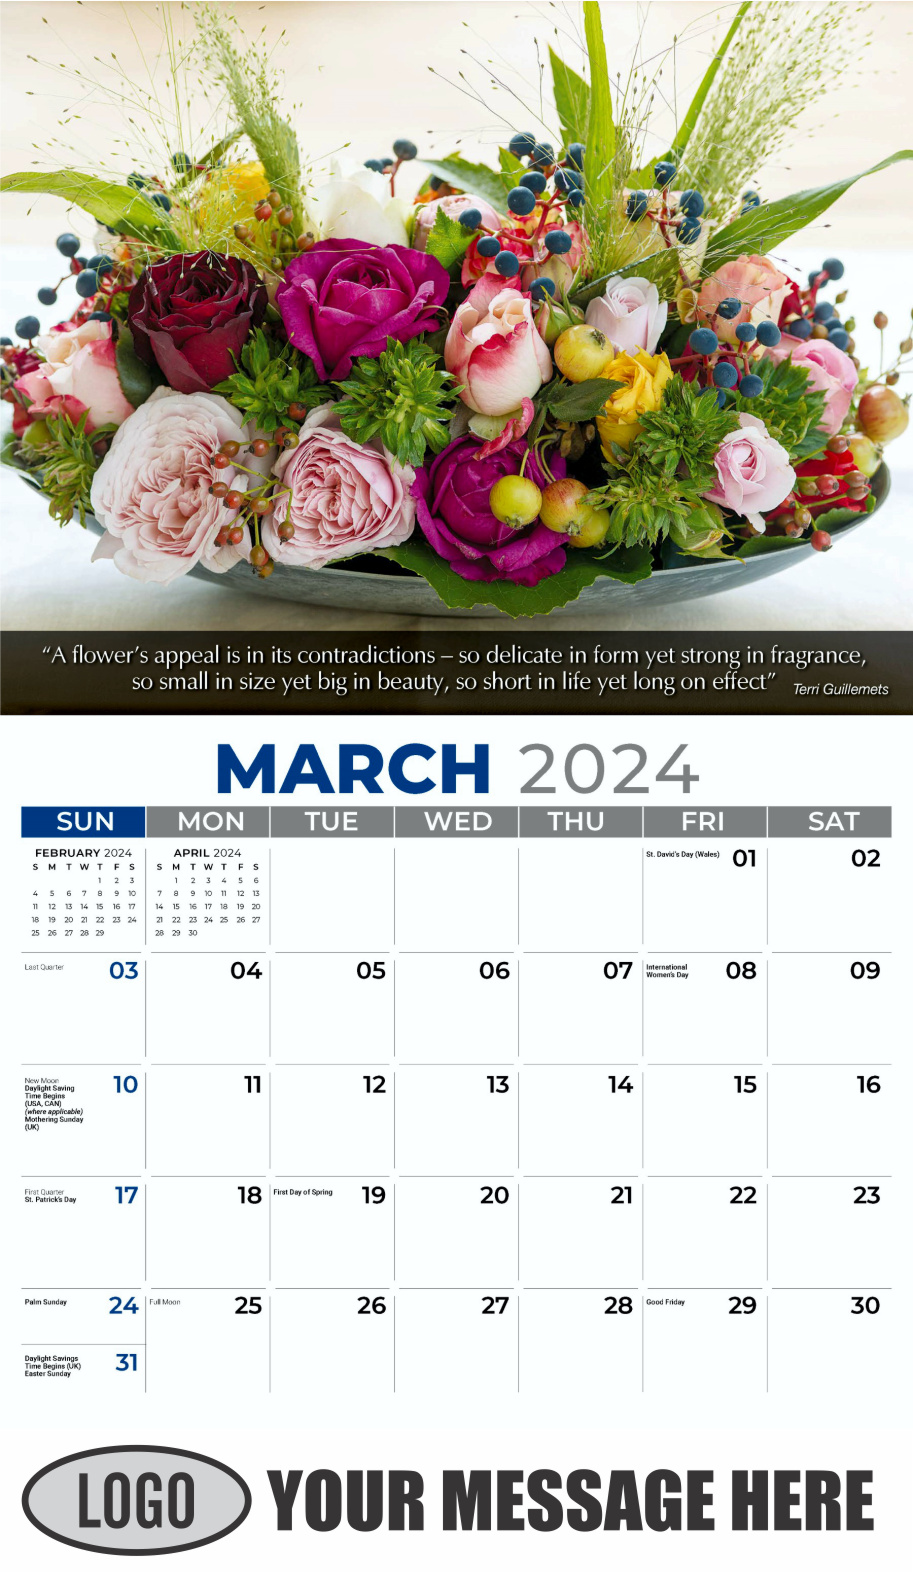 Flowers and Gardens 2024 Business Advertising Calendar - March